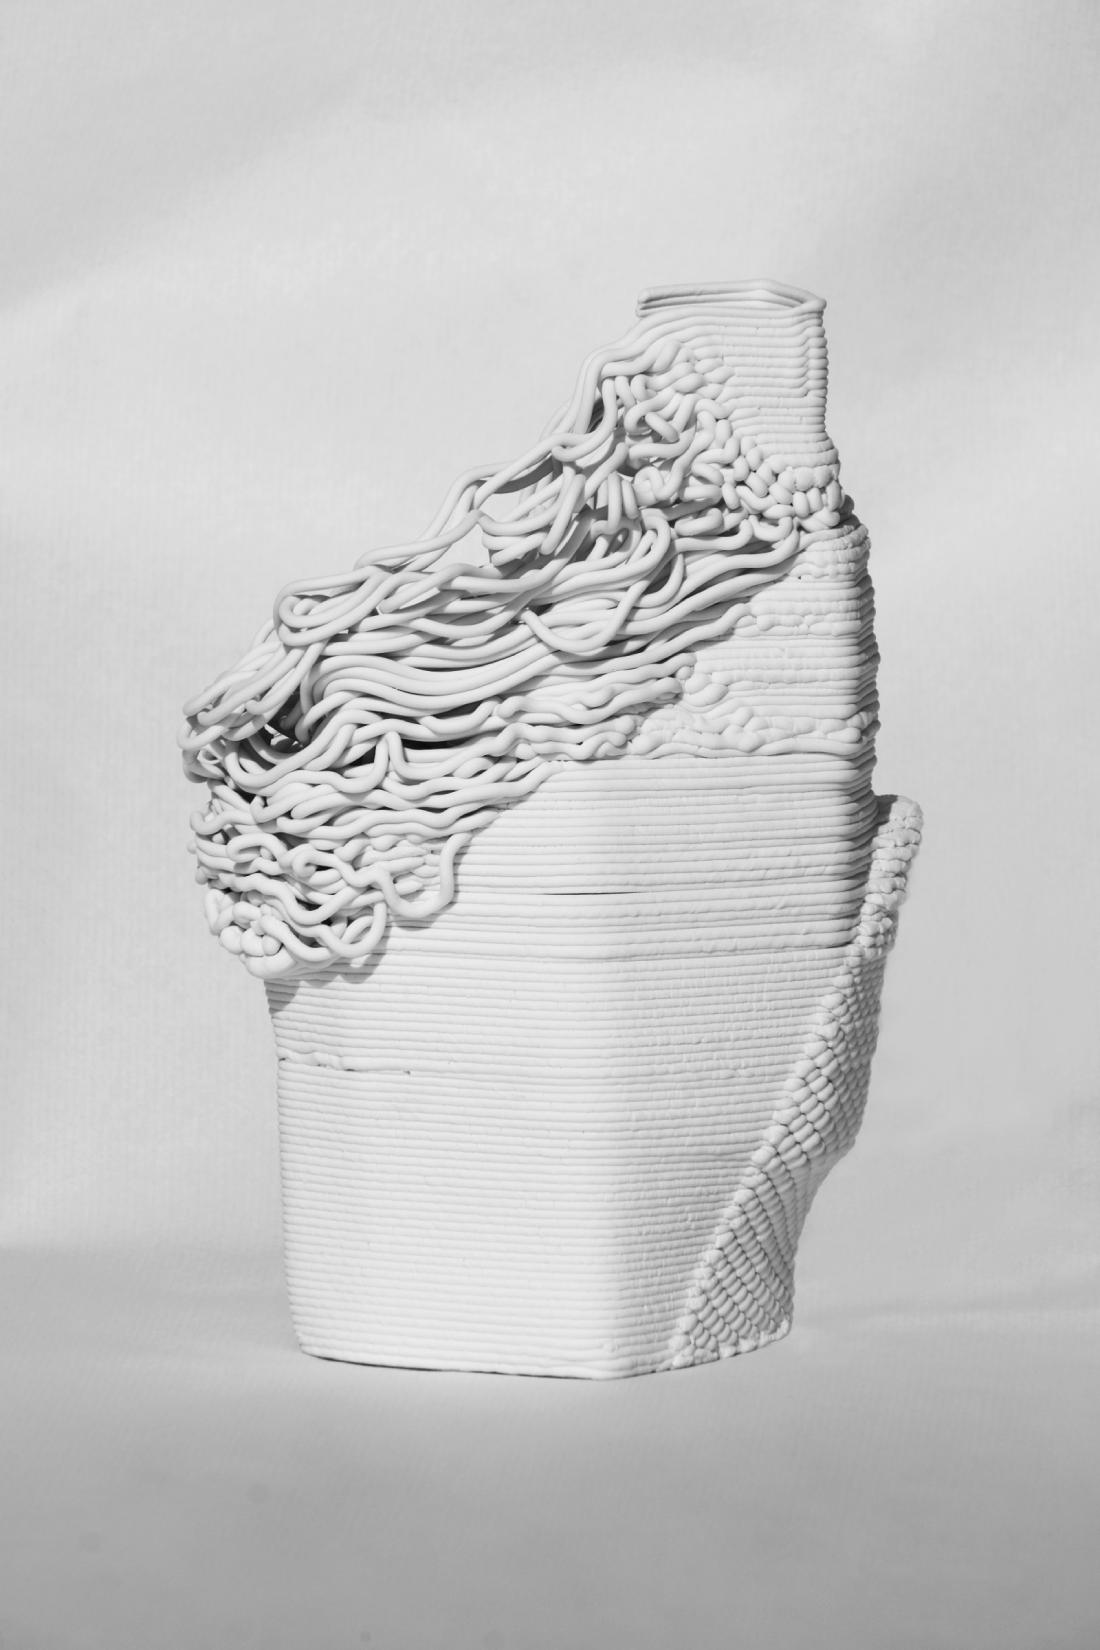 First piece, made of printed porcelain. The layers collapse on the left side, and a well-defined patch of knitted-like texture emerges from the bottom-right.